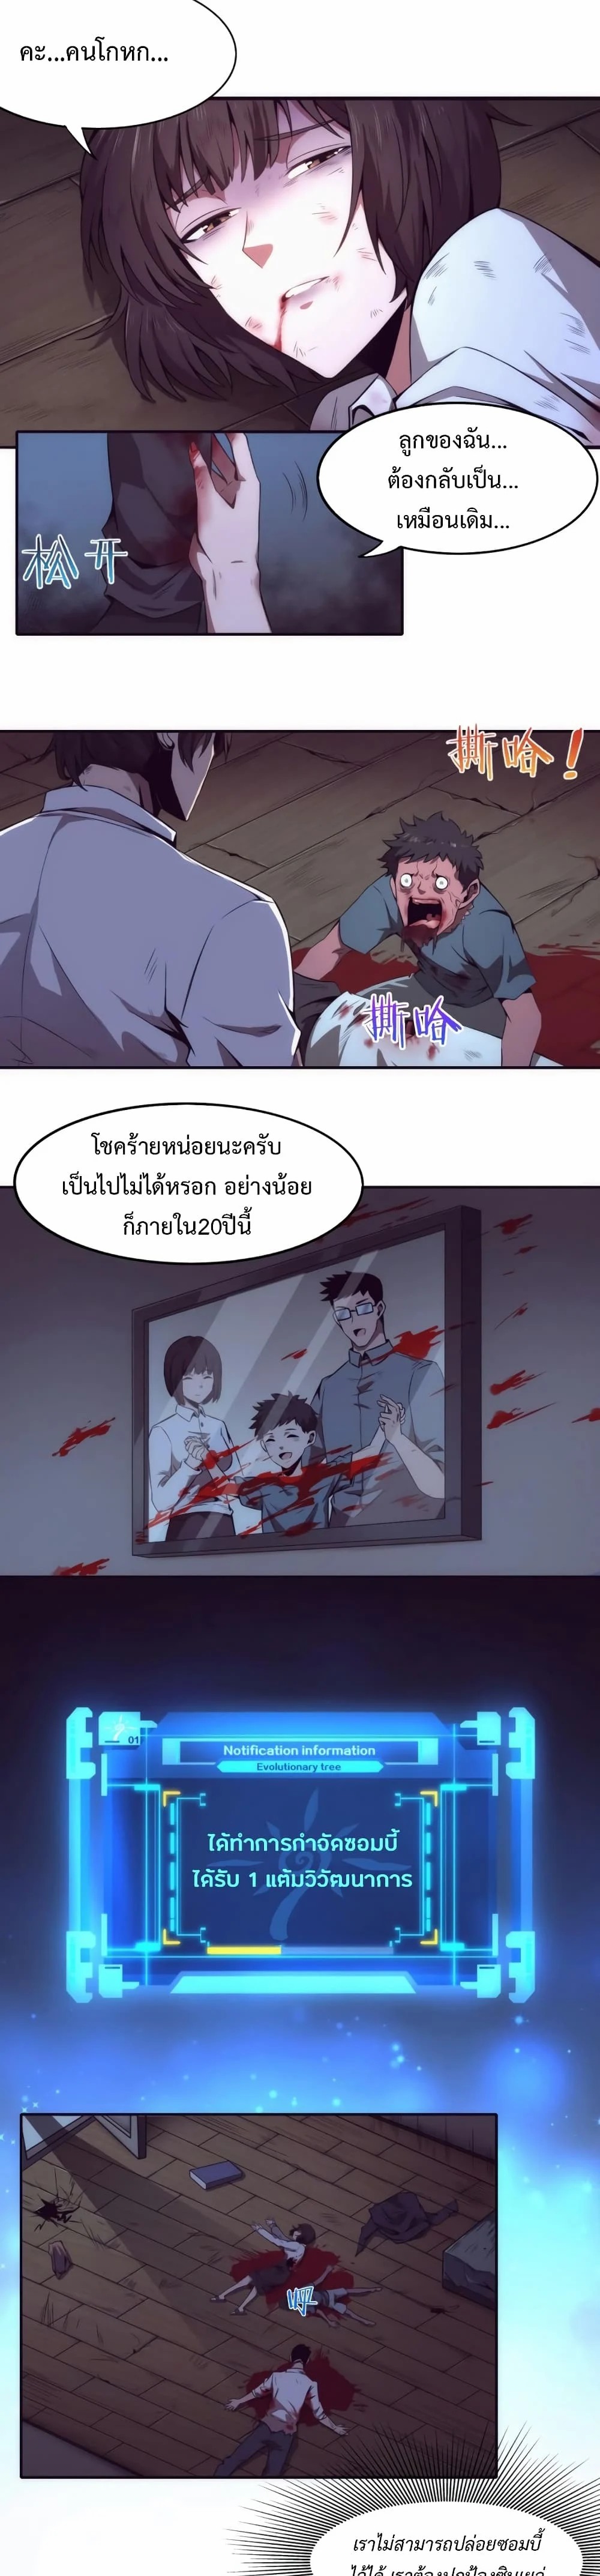 The Frenzy of Evolution ตอนที่ 4